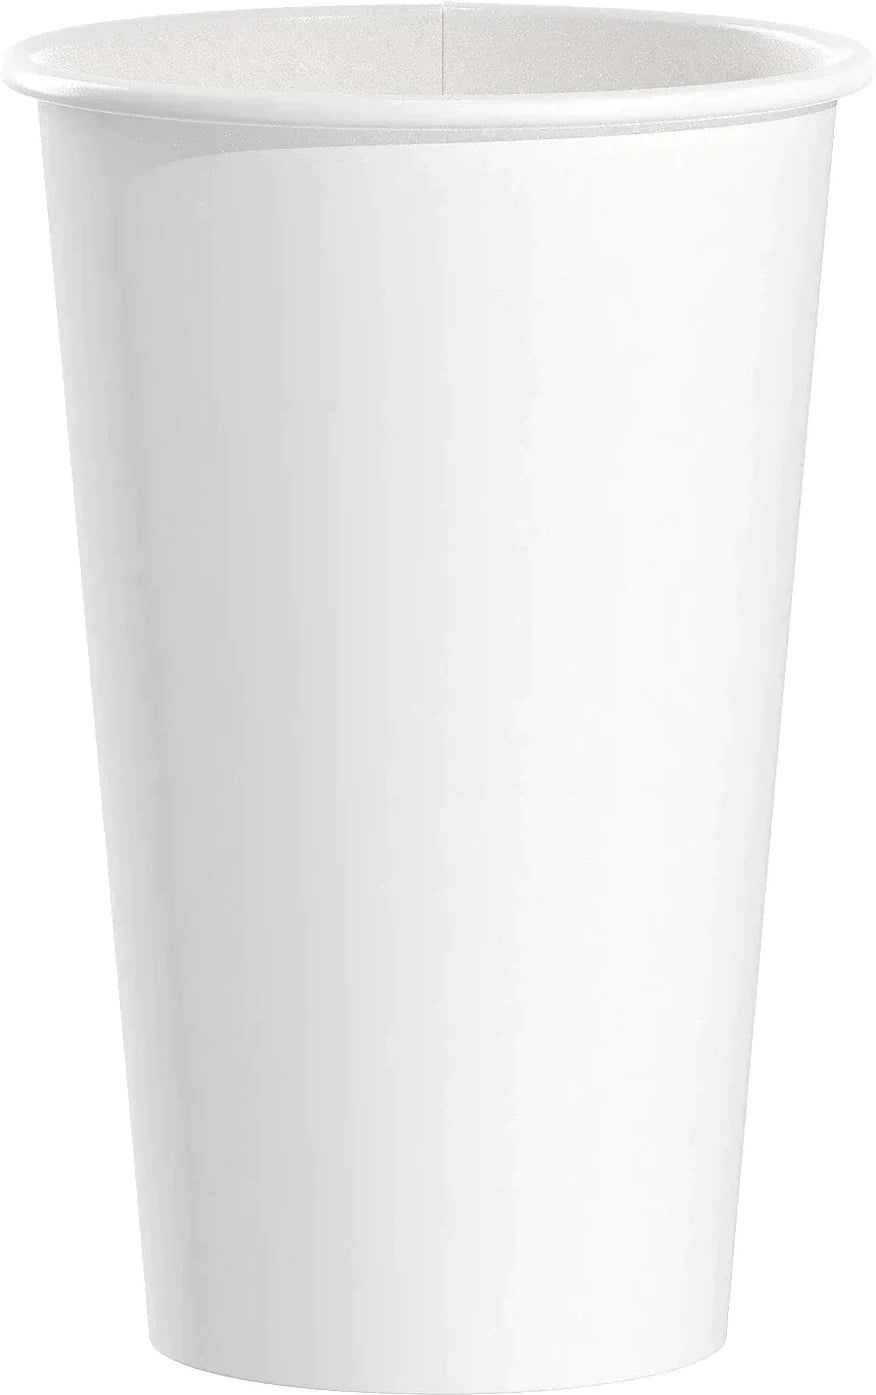 Dart Container - 20 Oz SSP Paper White Hot Cup, 600/Cs - 420W-2050